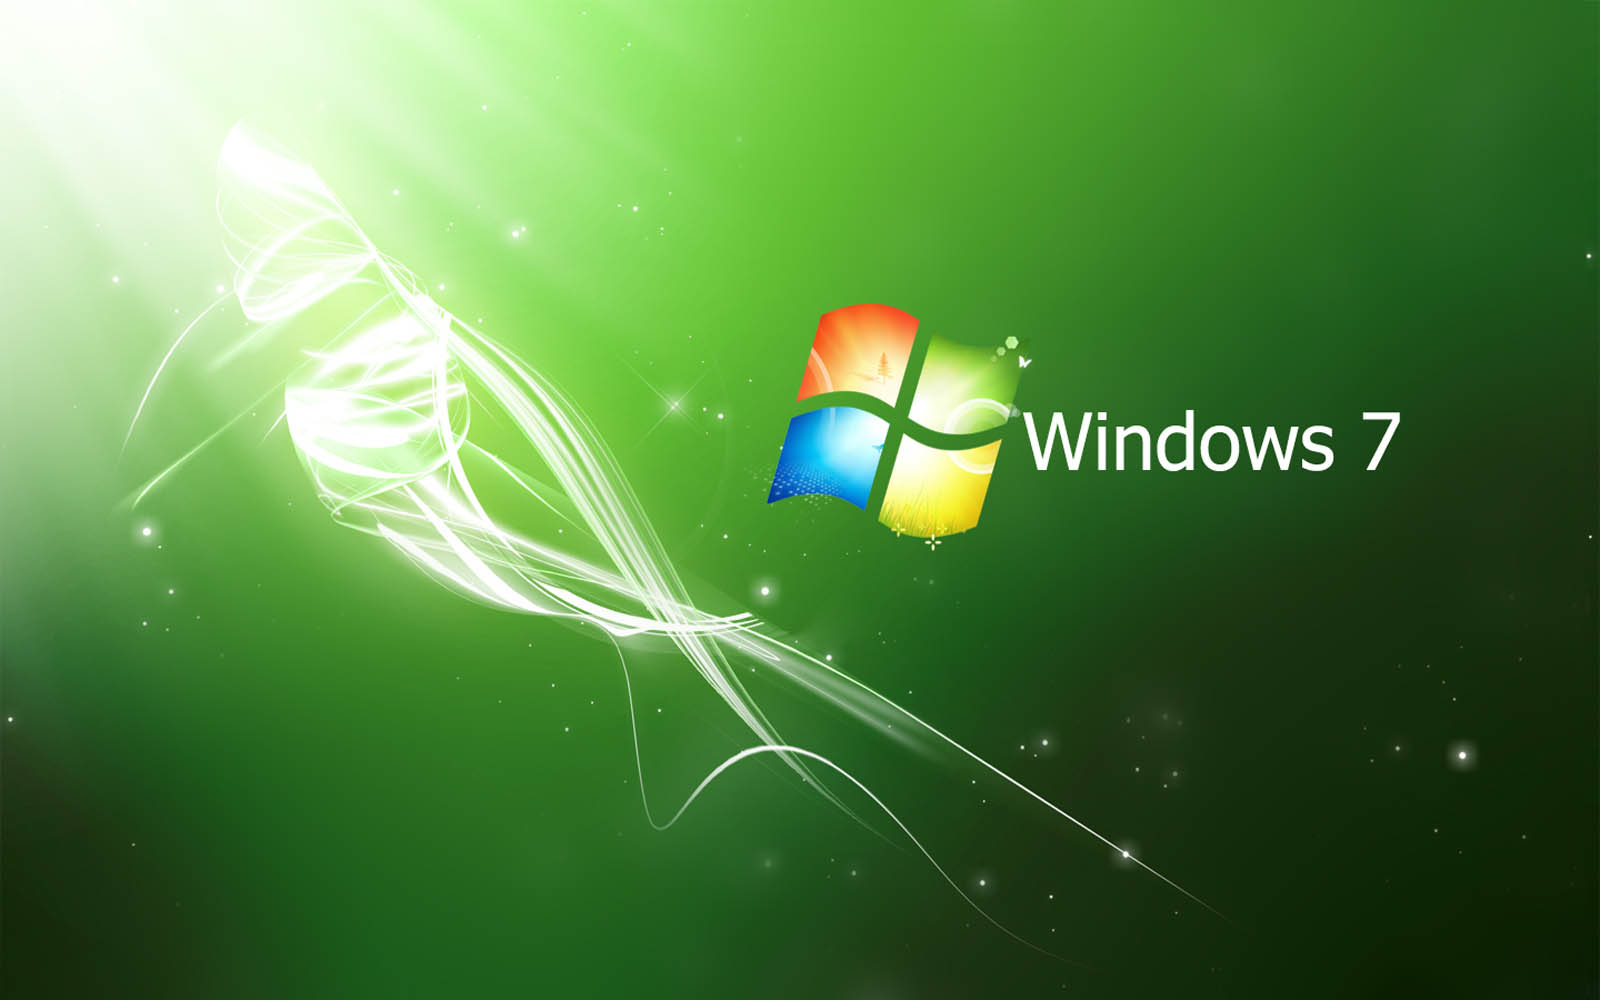 win7 wallpaper,green,operating system,technology,graphic design,graphics